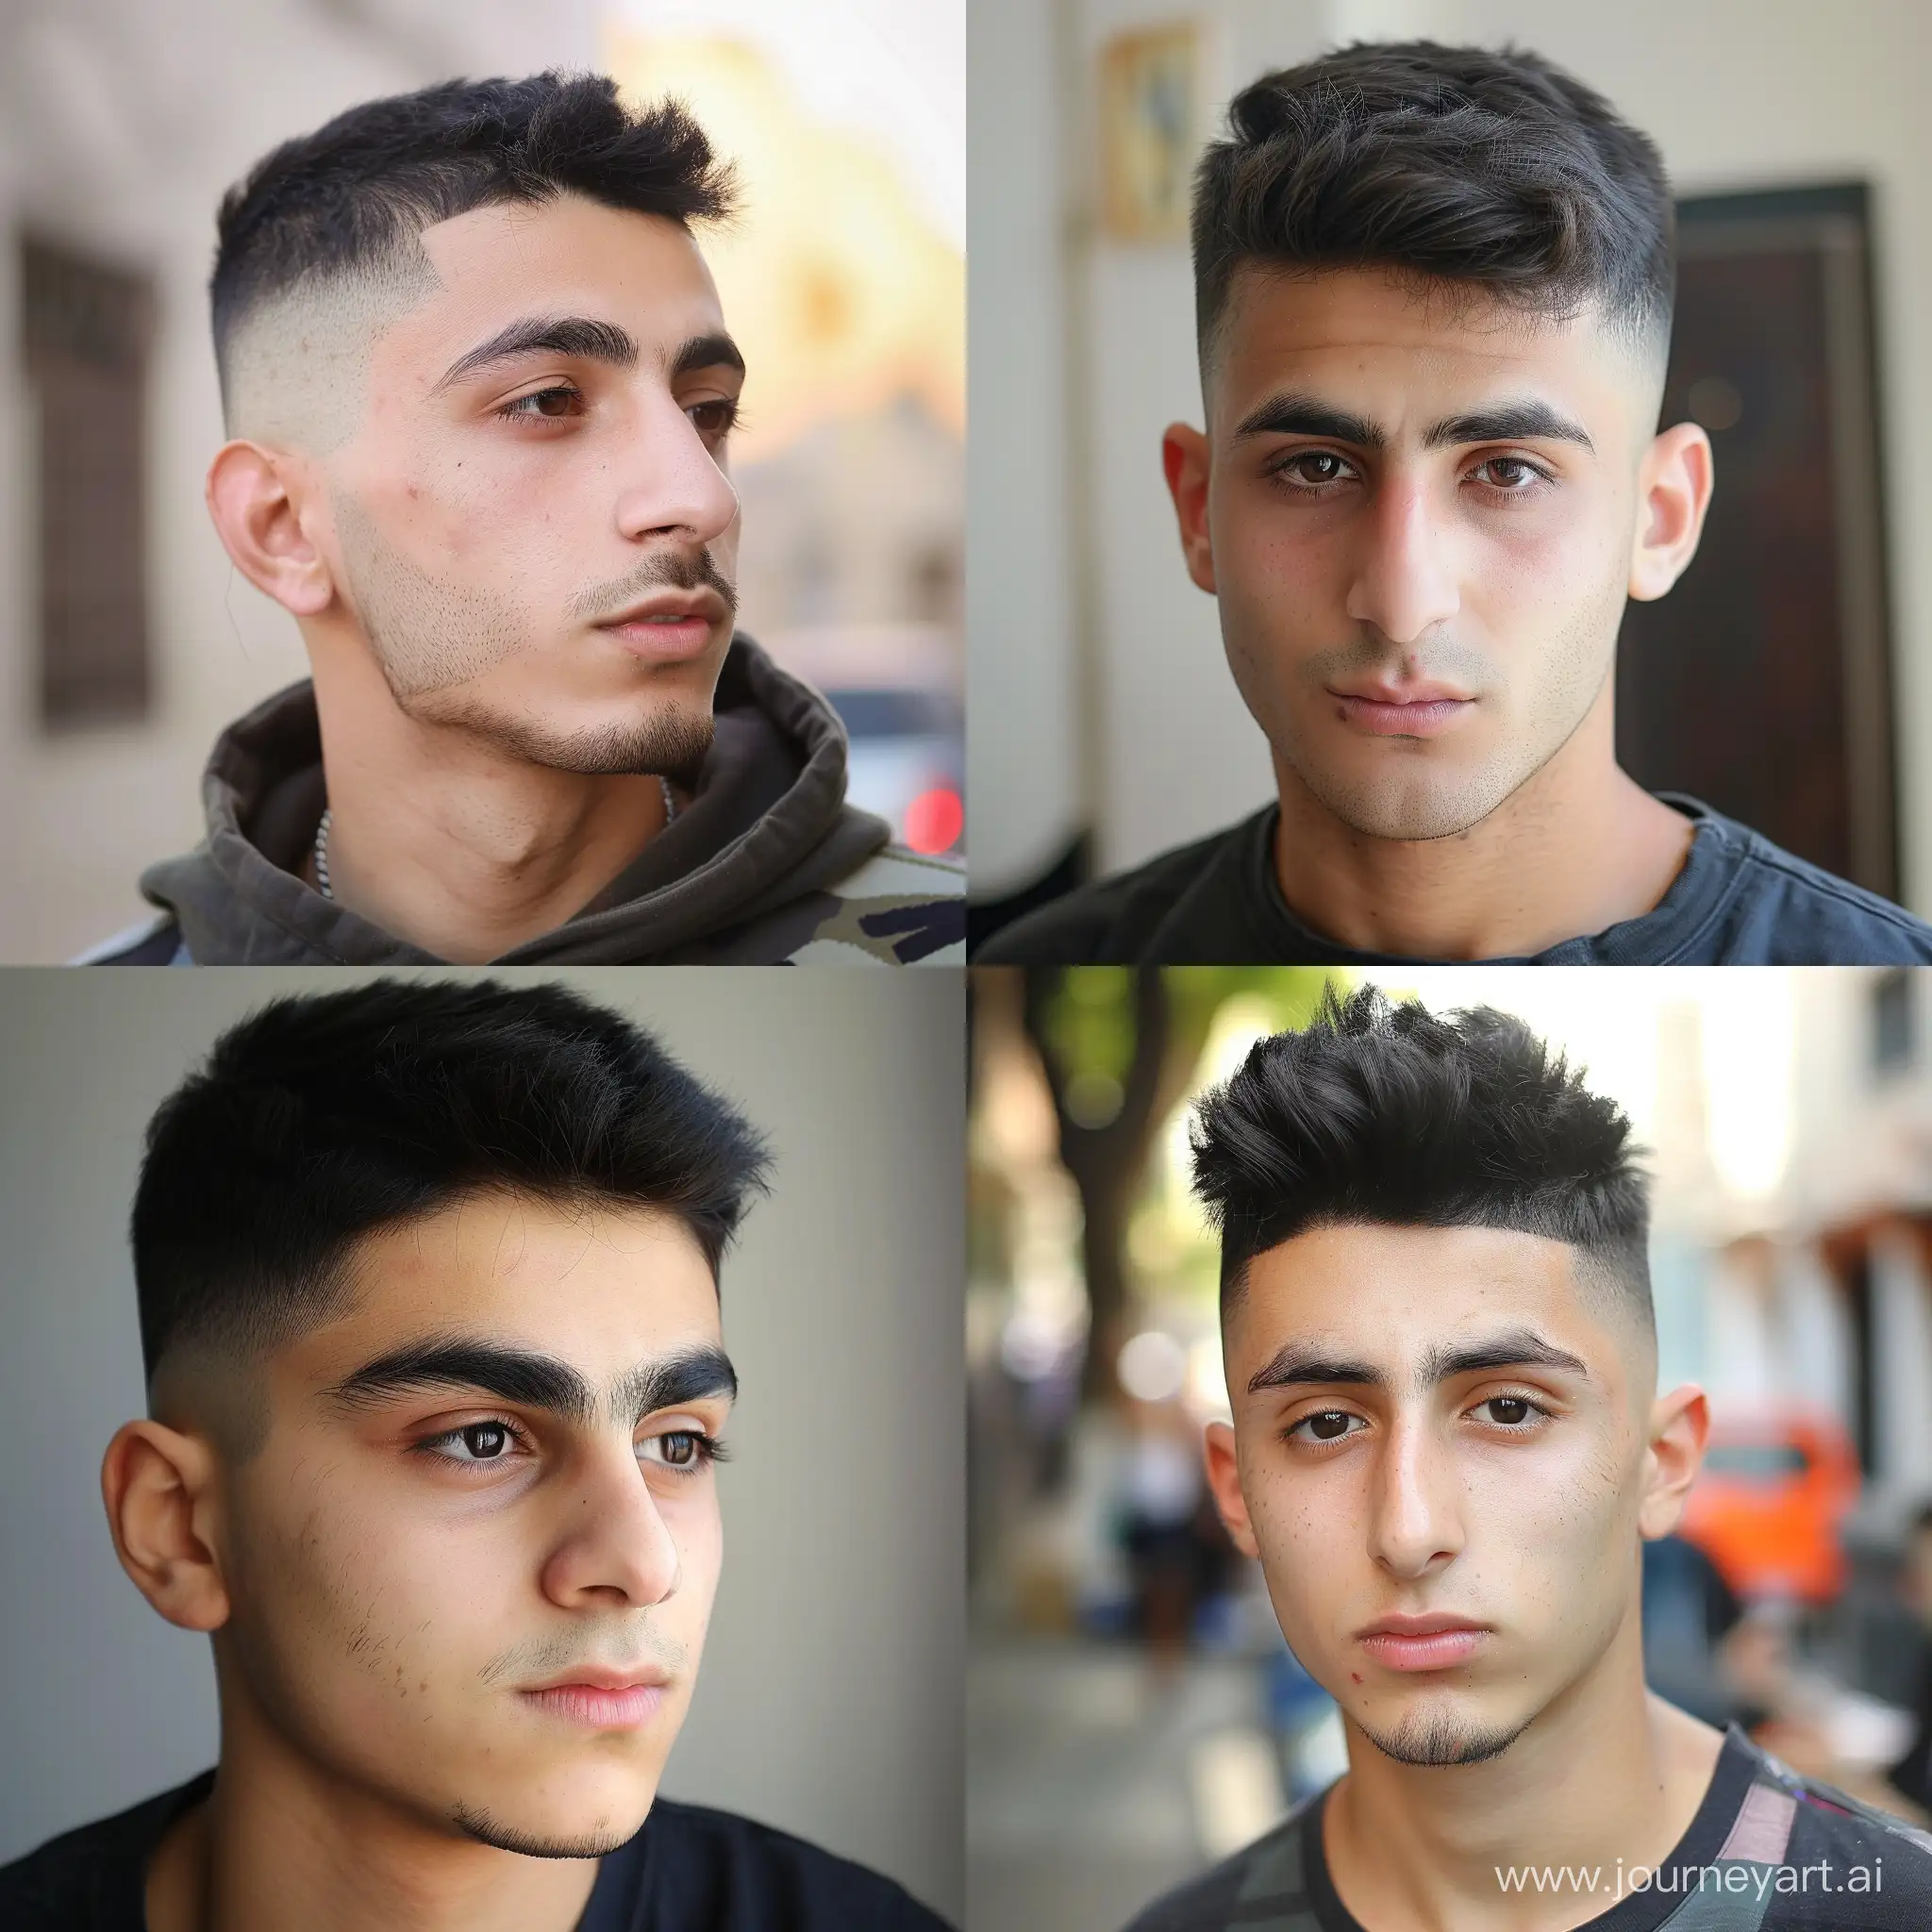 Young-Iranian-Man-with-Fade-Haircut-Portrait